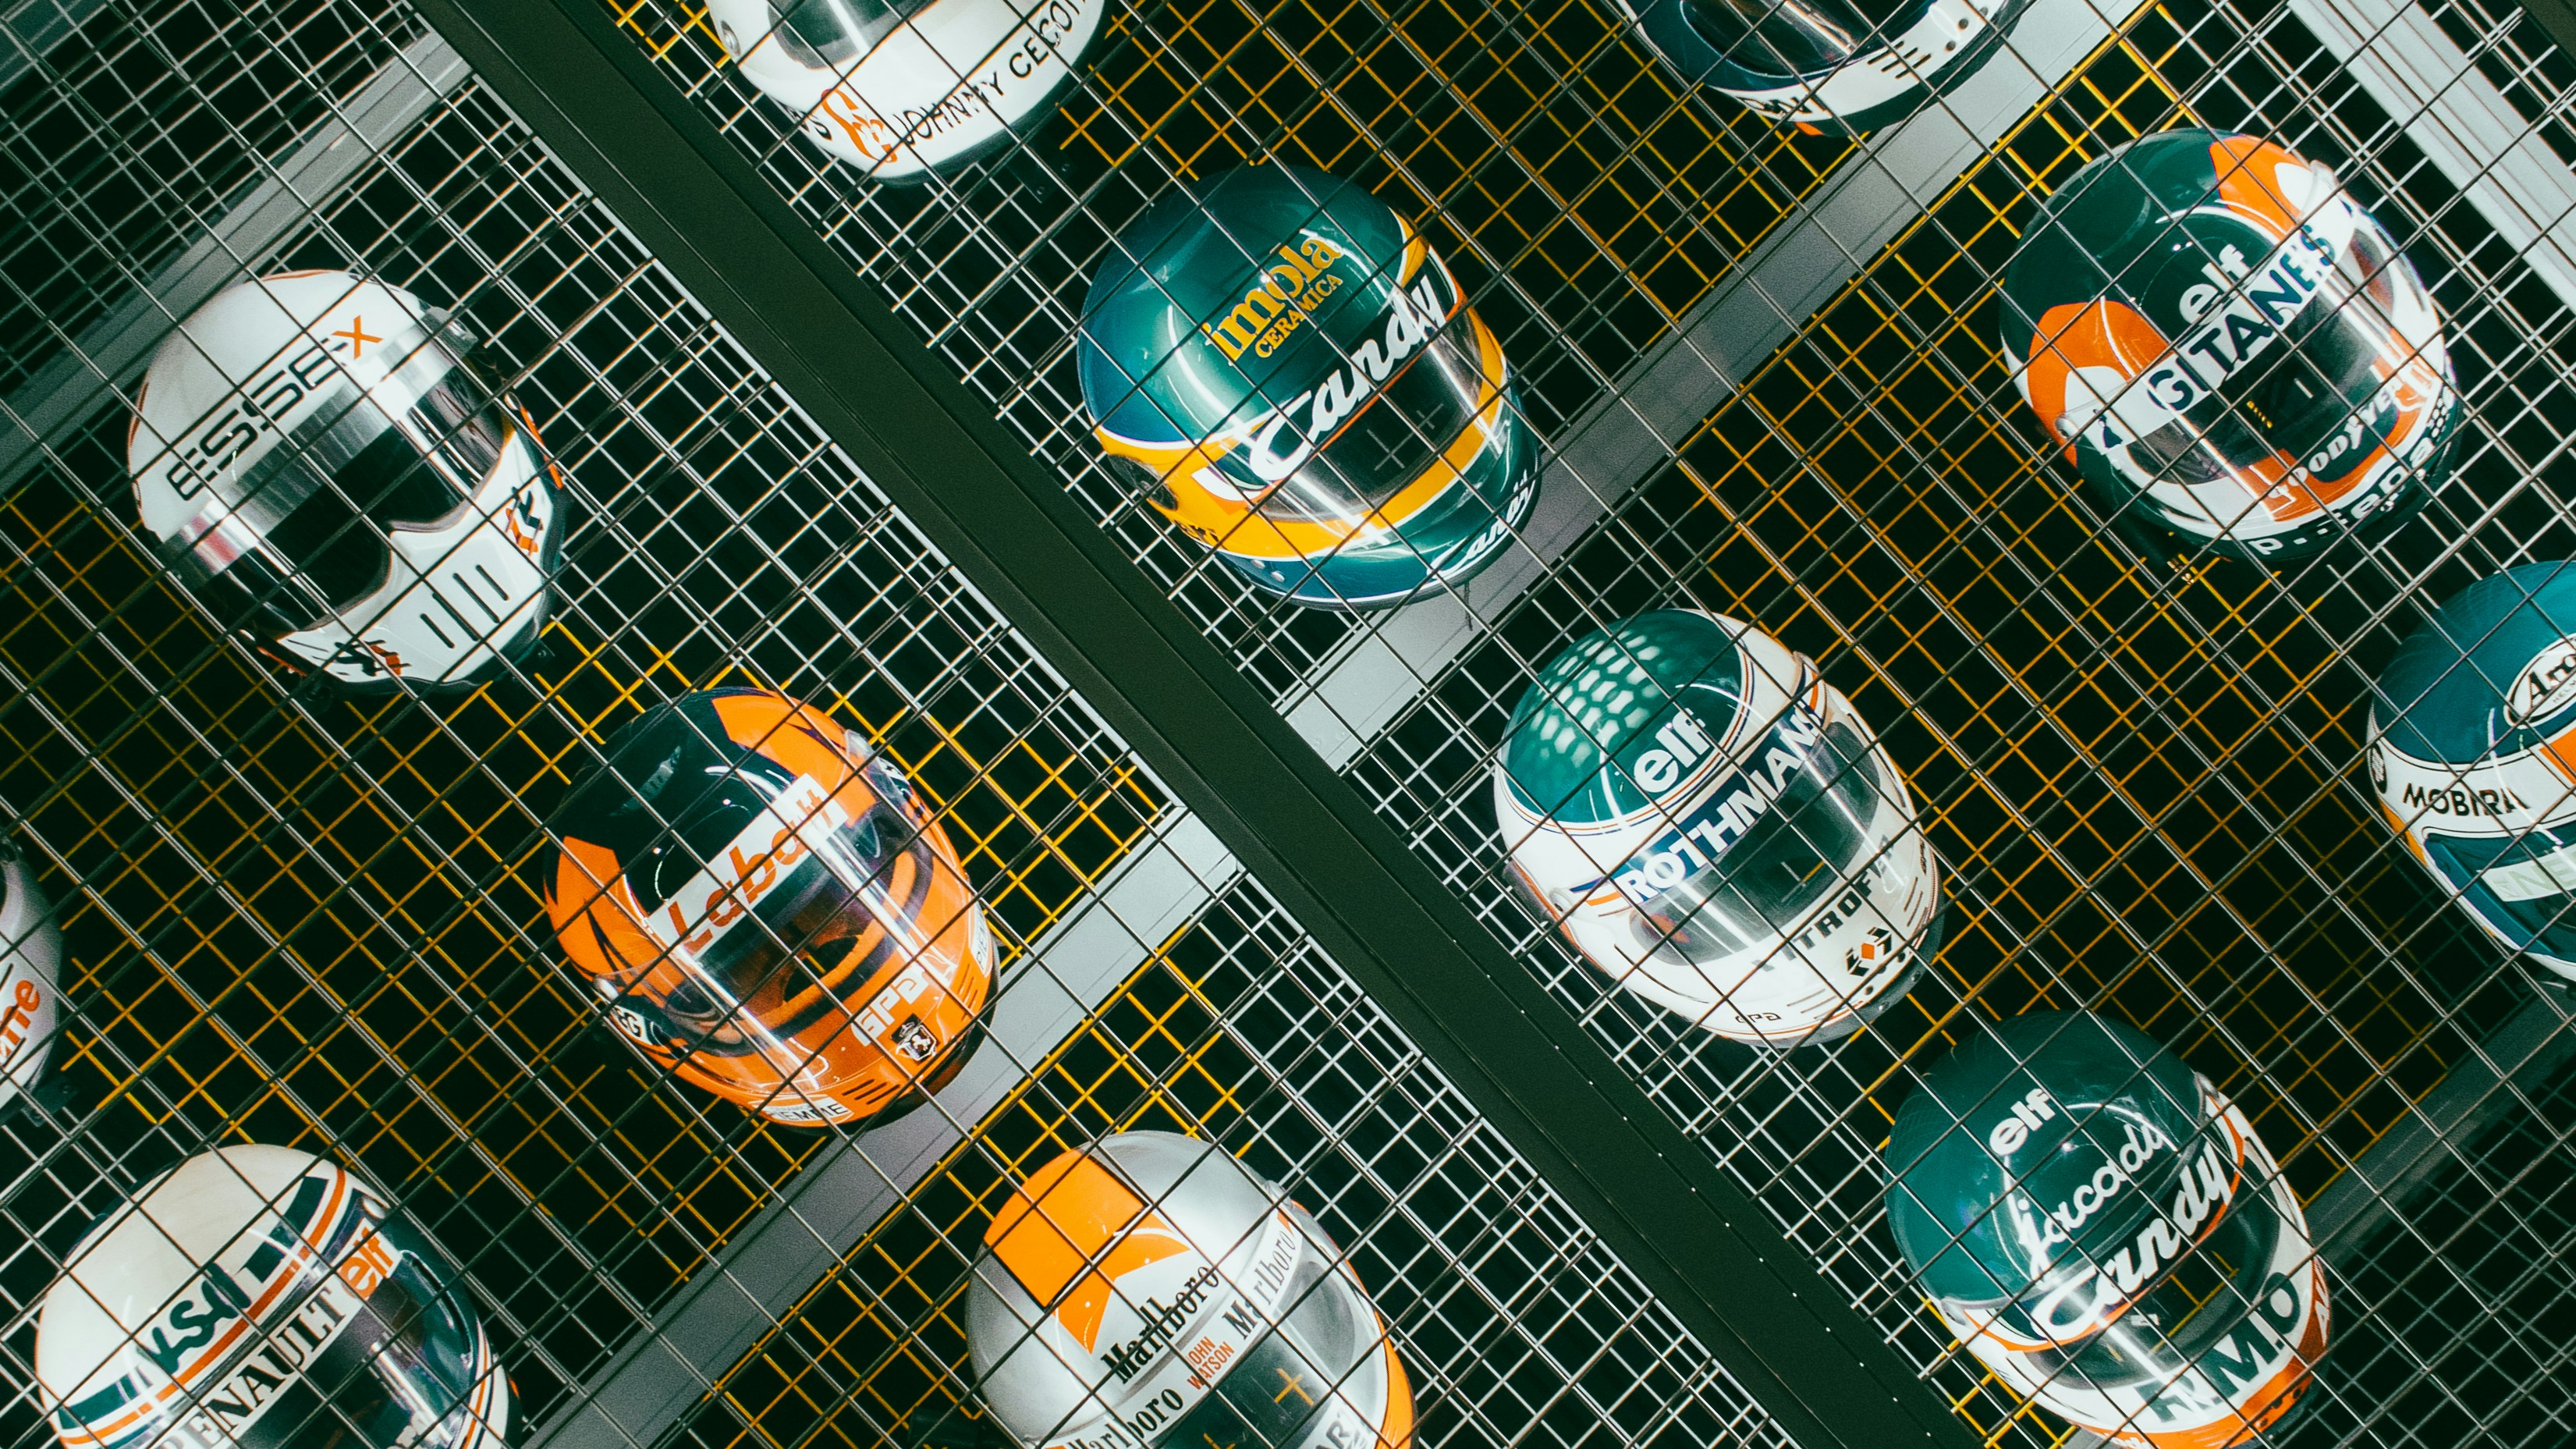 Formula one helmets presented at the F1 exhibition in Madrid, Spain.